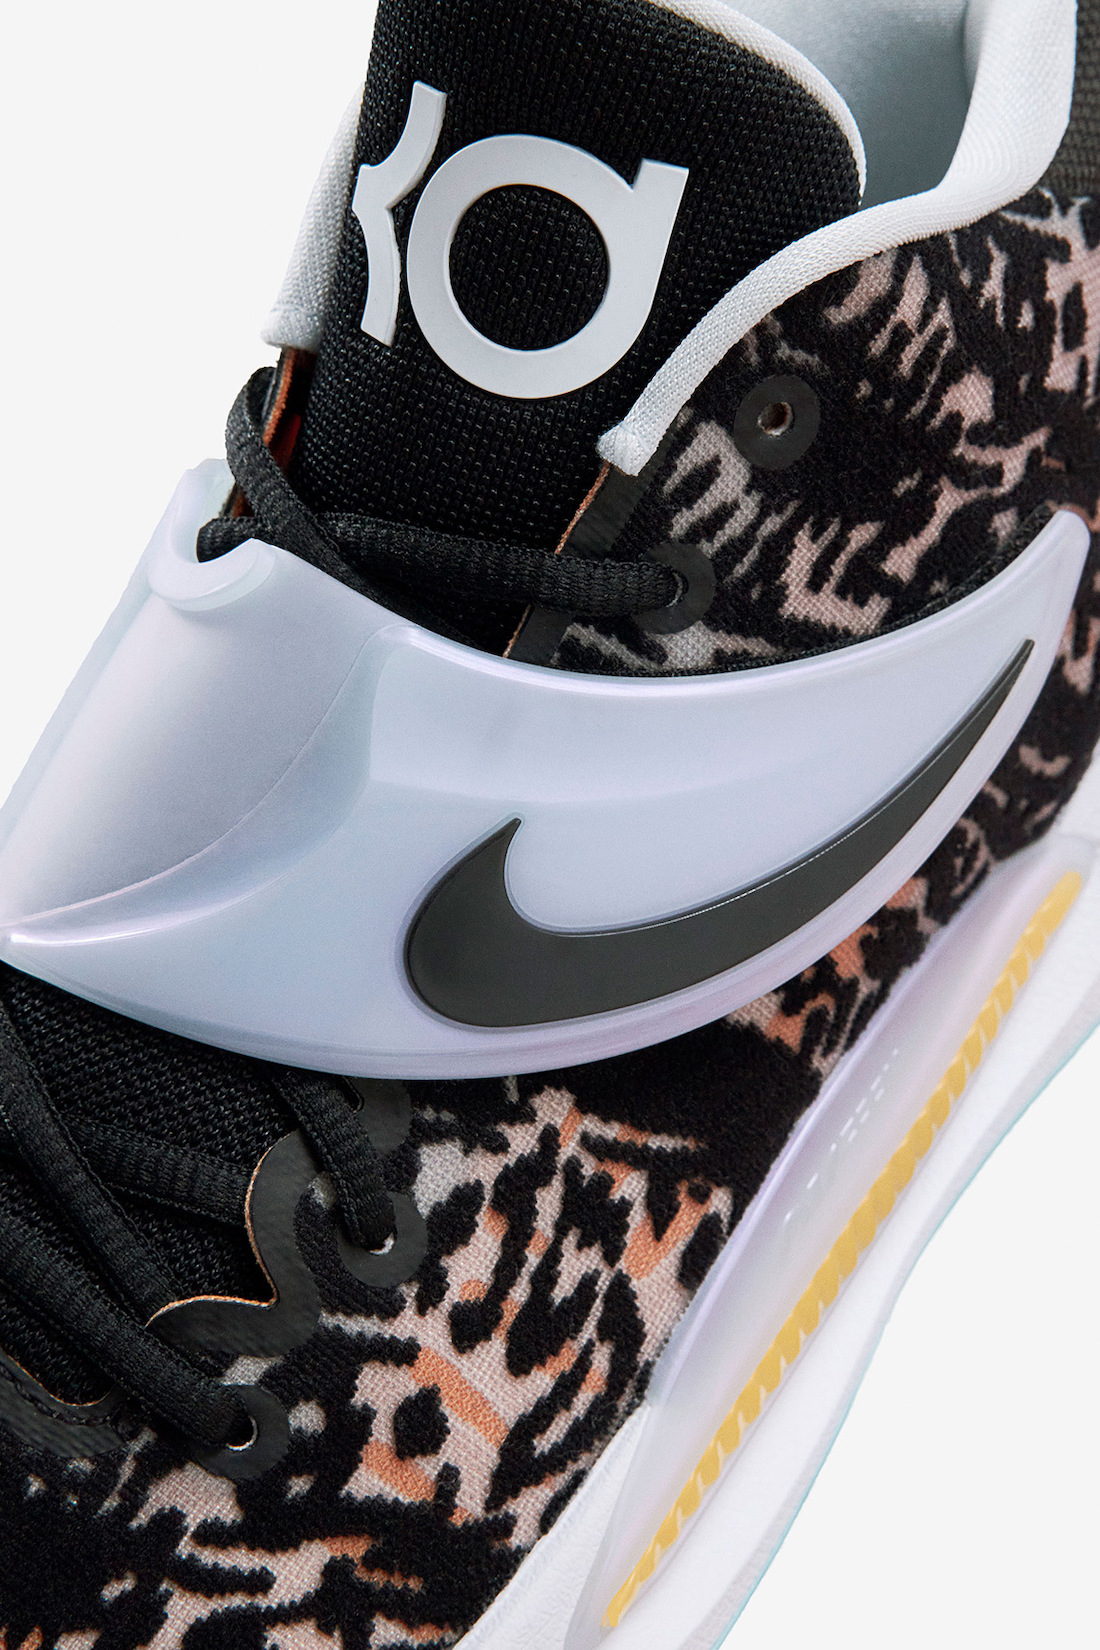 Nike-KD-14-Release-Date-Pricing-3